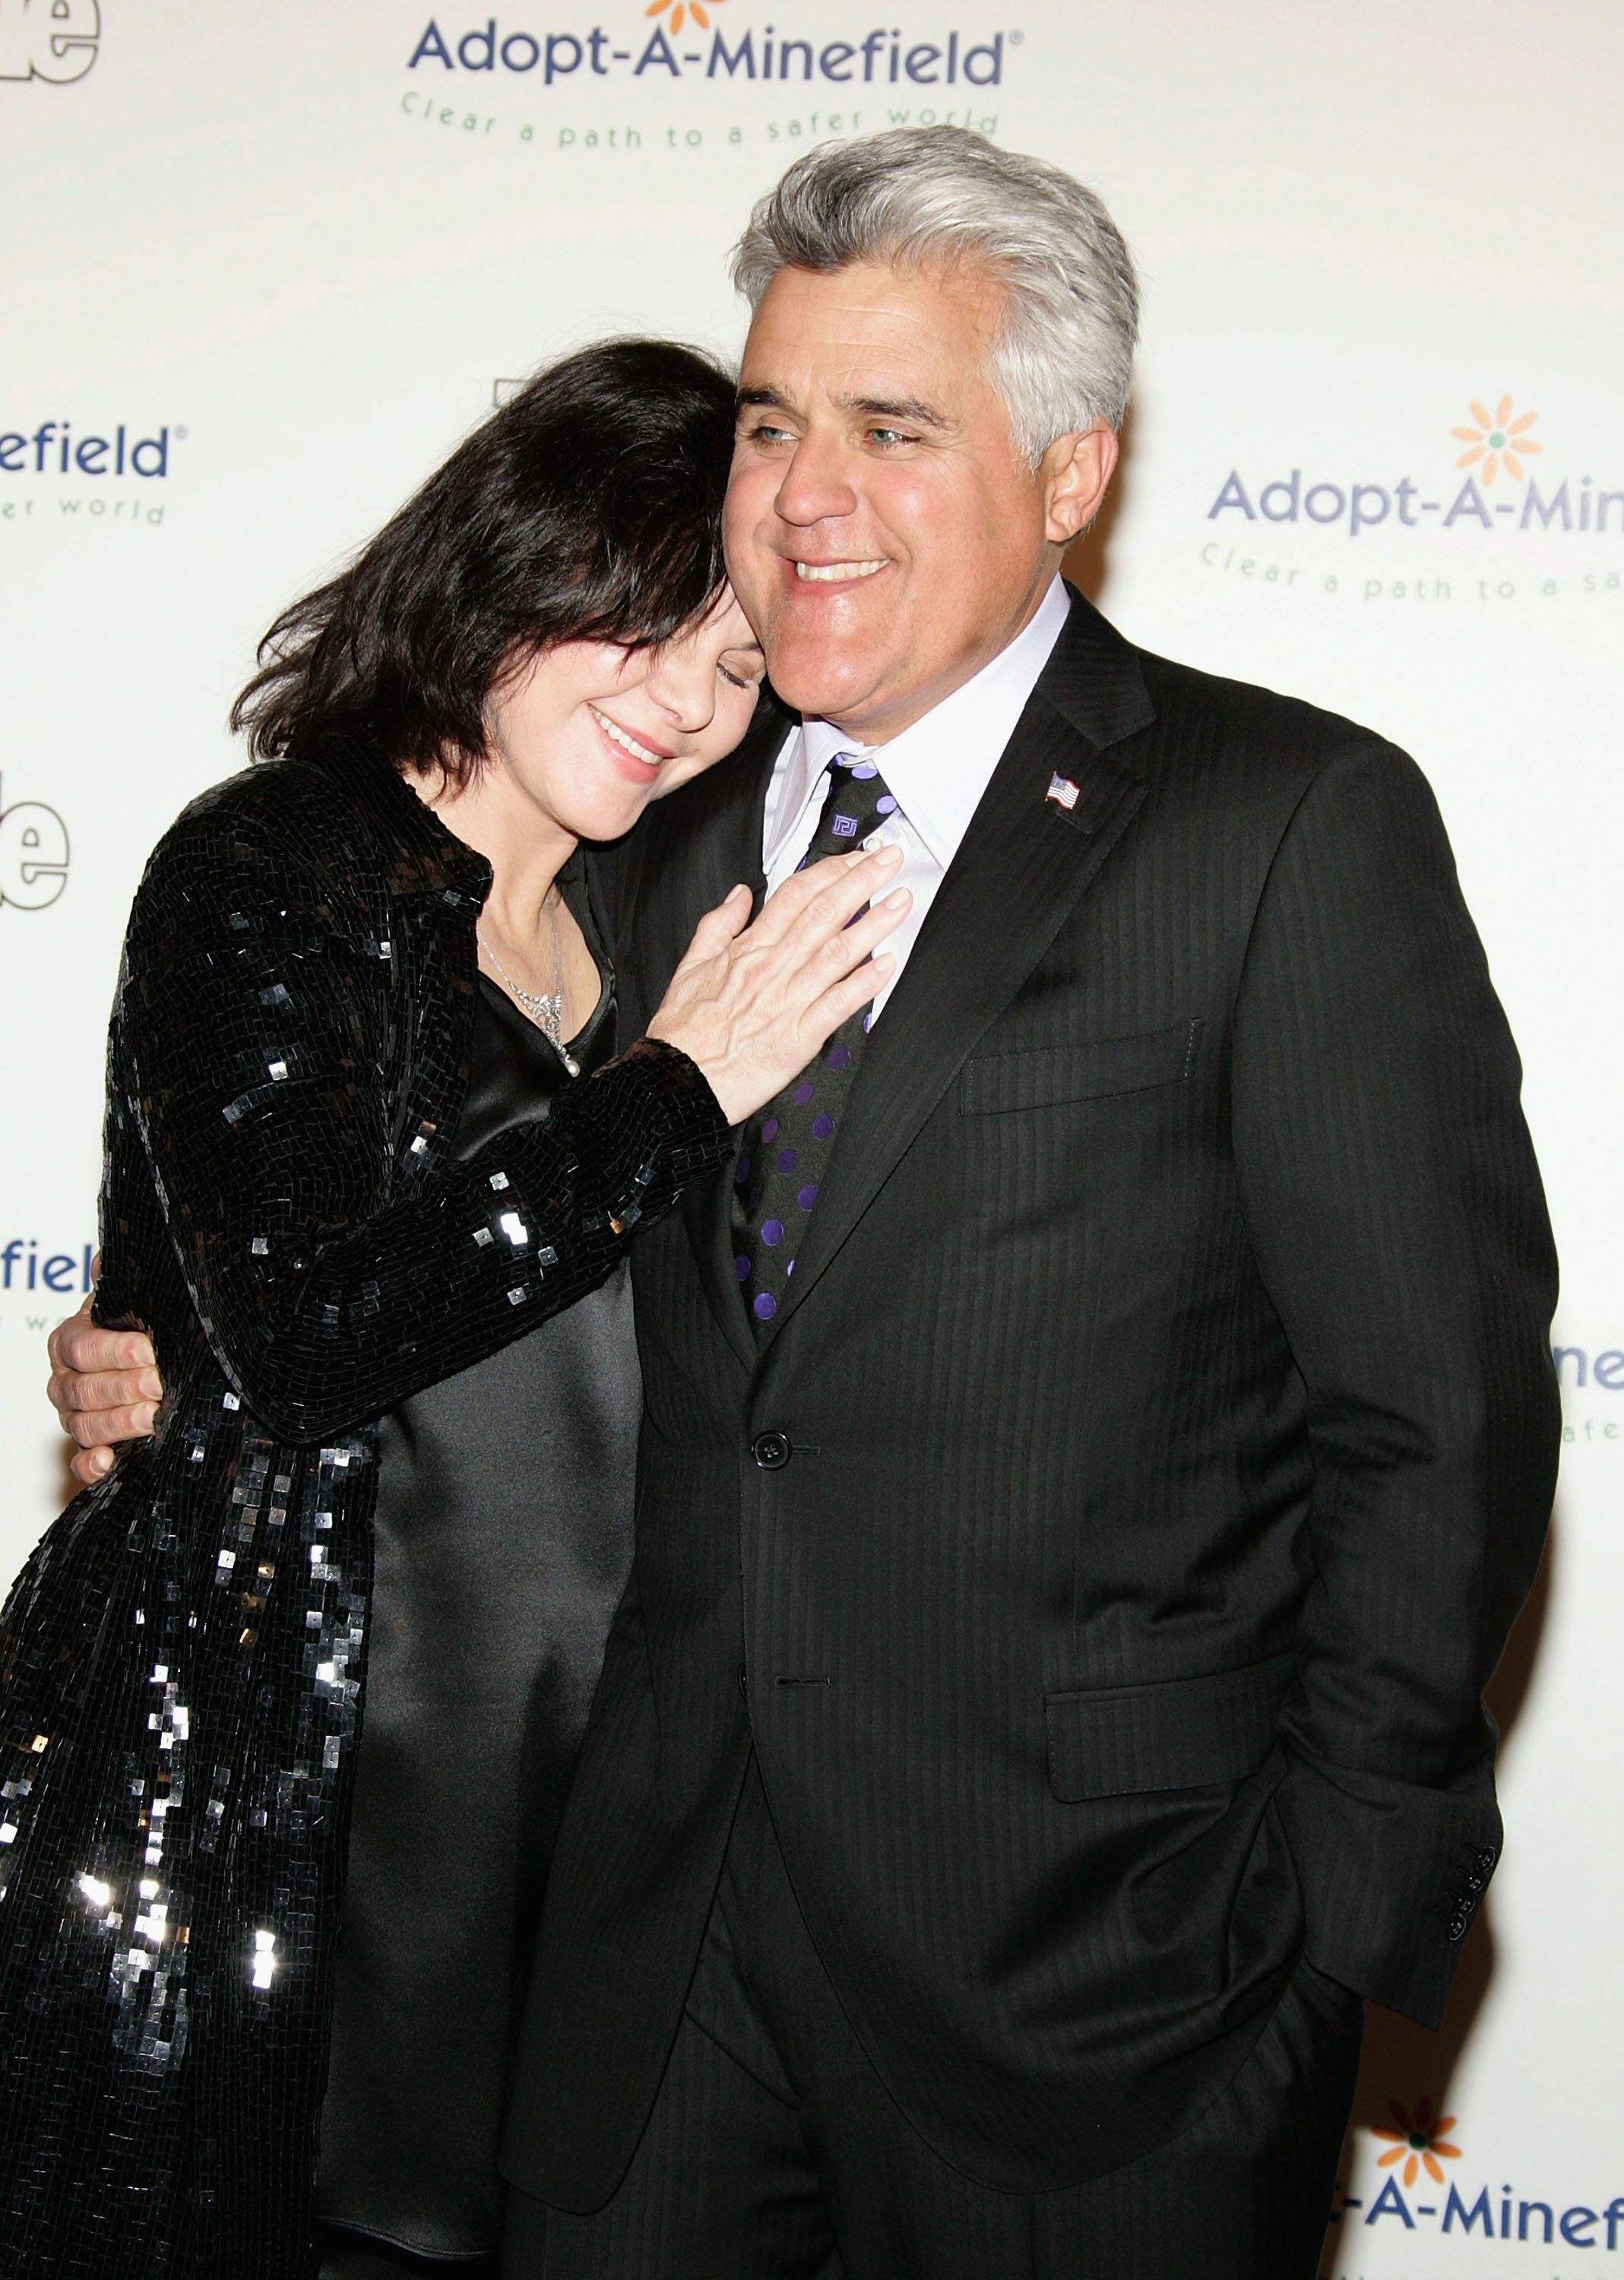 Jay Leno and his wife Mavis Nicholson at the Fifth Annual Adopt-A-Minefield Gala night on November 15, 2005, in Beverly Hills, California | Photo: Frazer Harrison/Getty Images